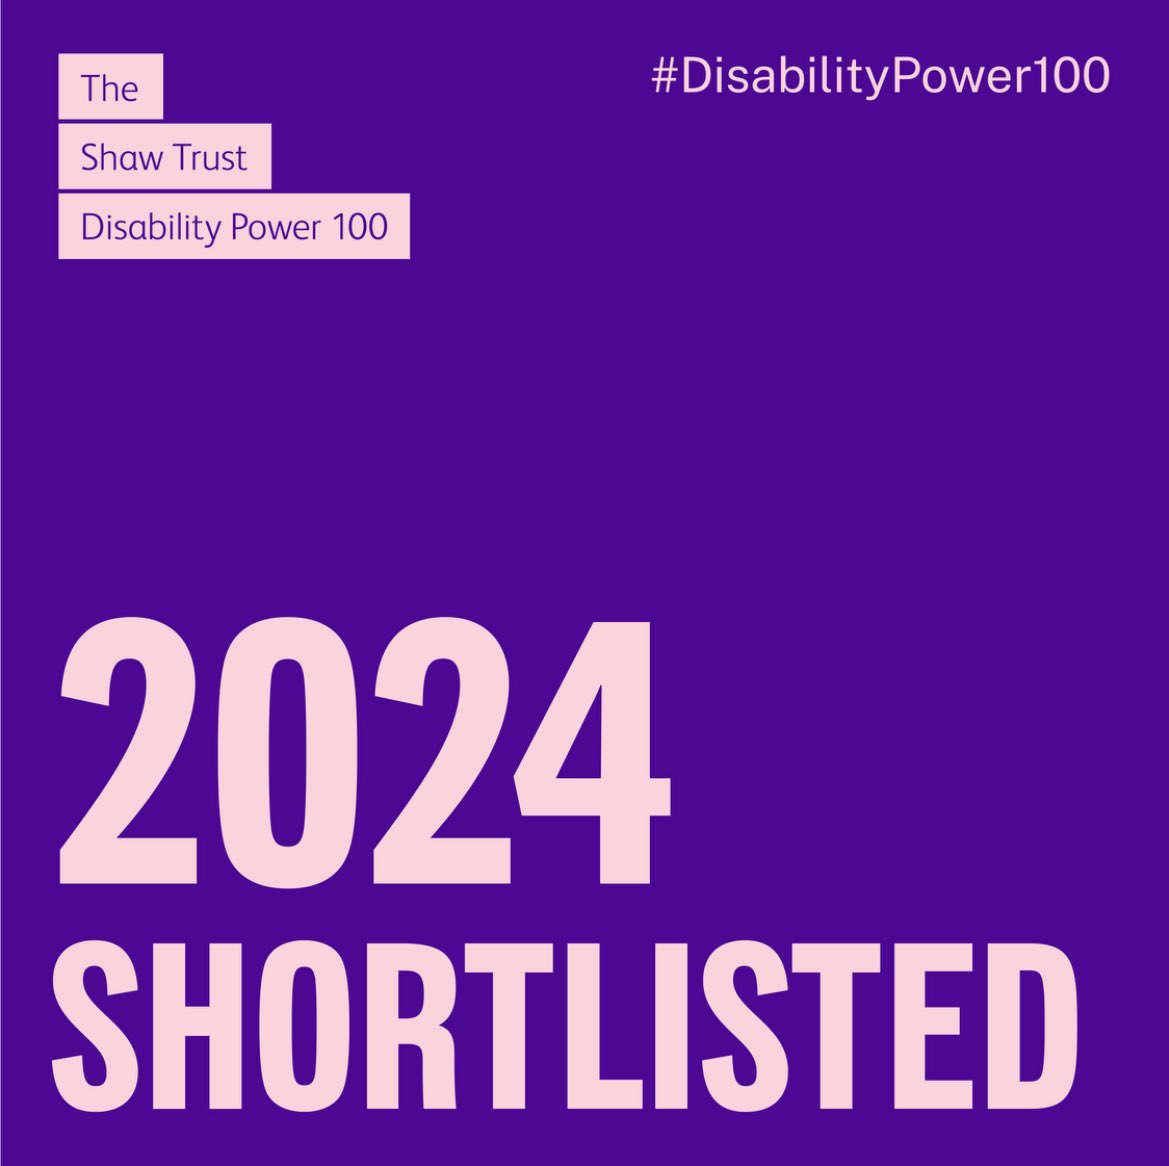 So lovely to hear today that I have been nominated and shortlisted for my work on the Shaw Trust Disability Power 100. 

#DisabilityPower100